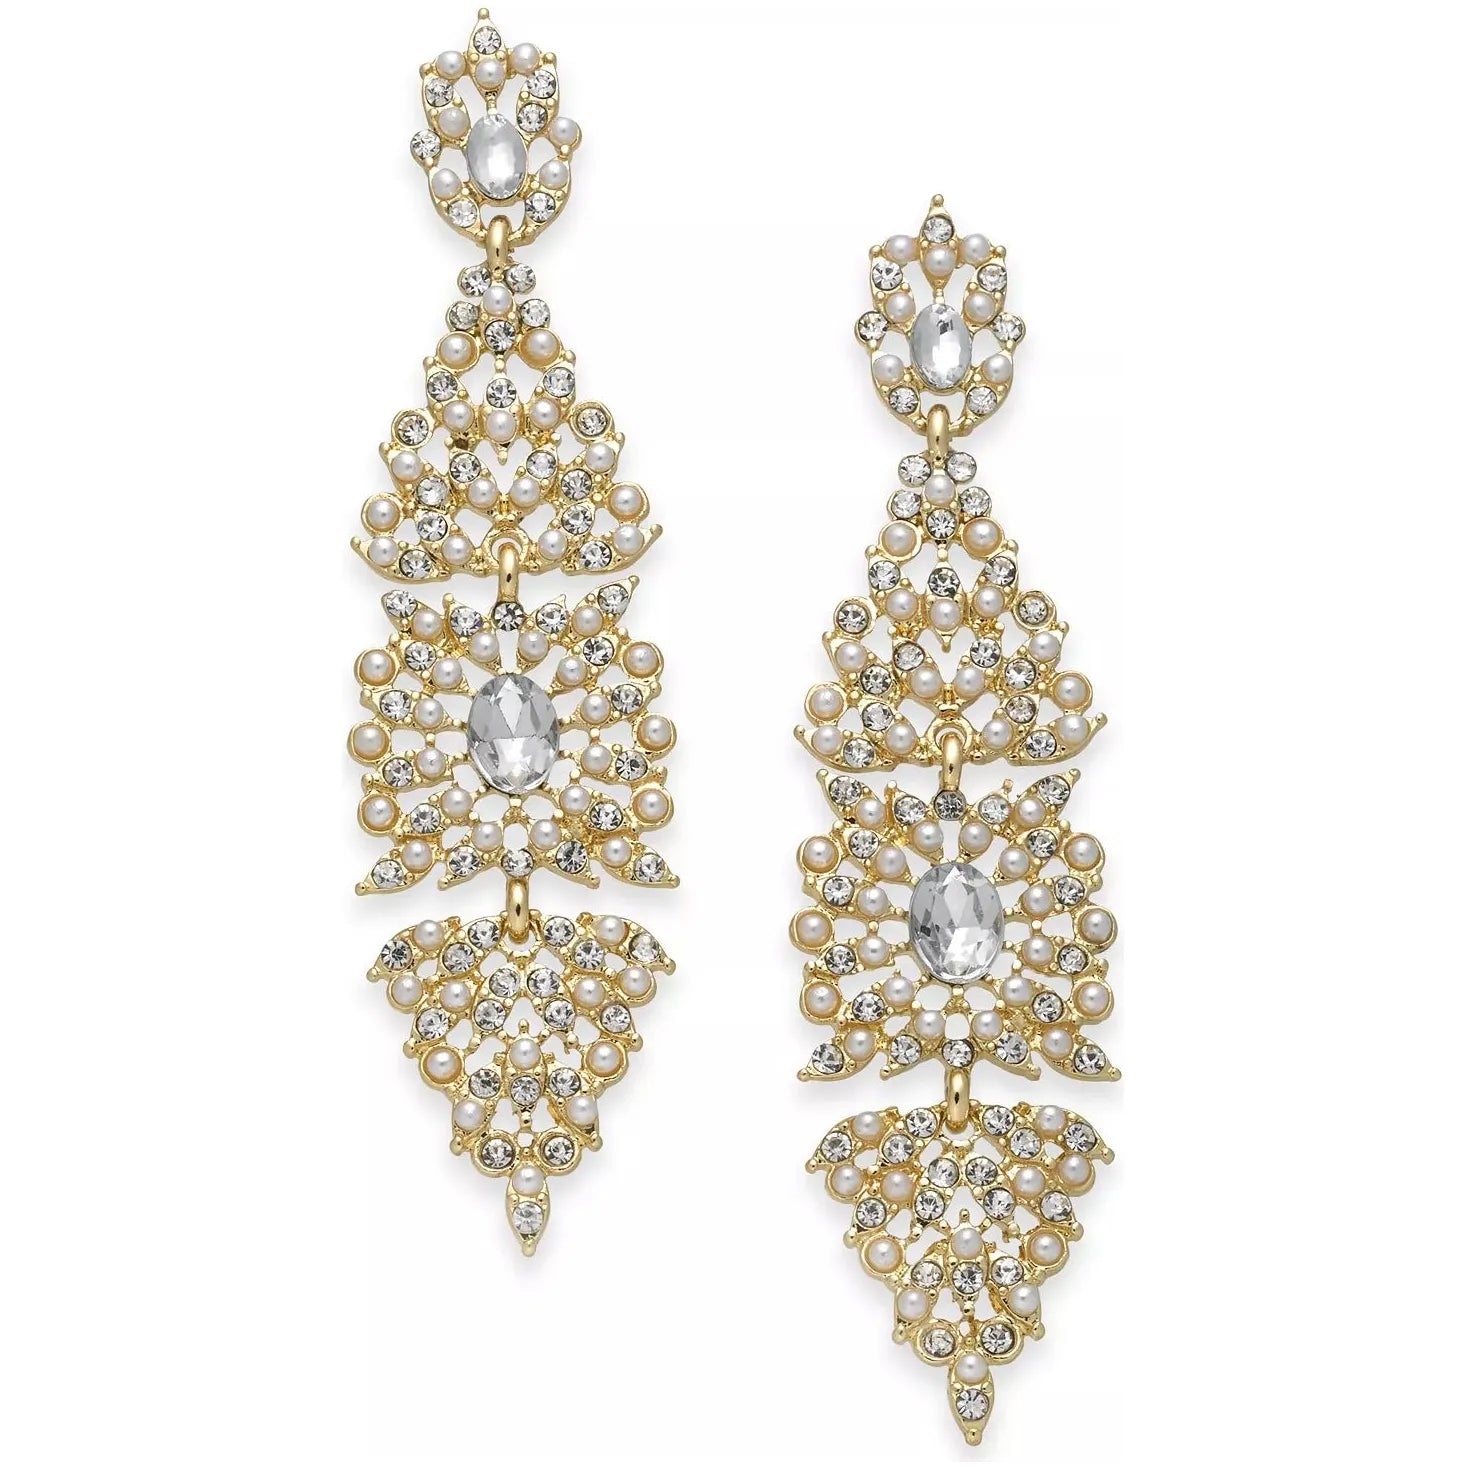 INC International Concepts-I.N.C. Gold Tone Crystal & Imitation Pearl Kite Drop Earrings, Created for Macys - Brandat Outlet